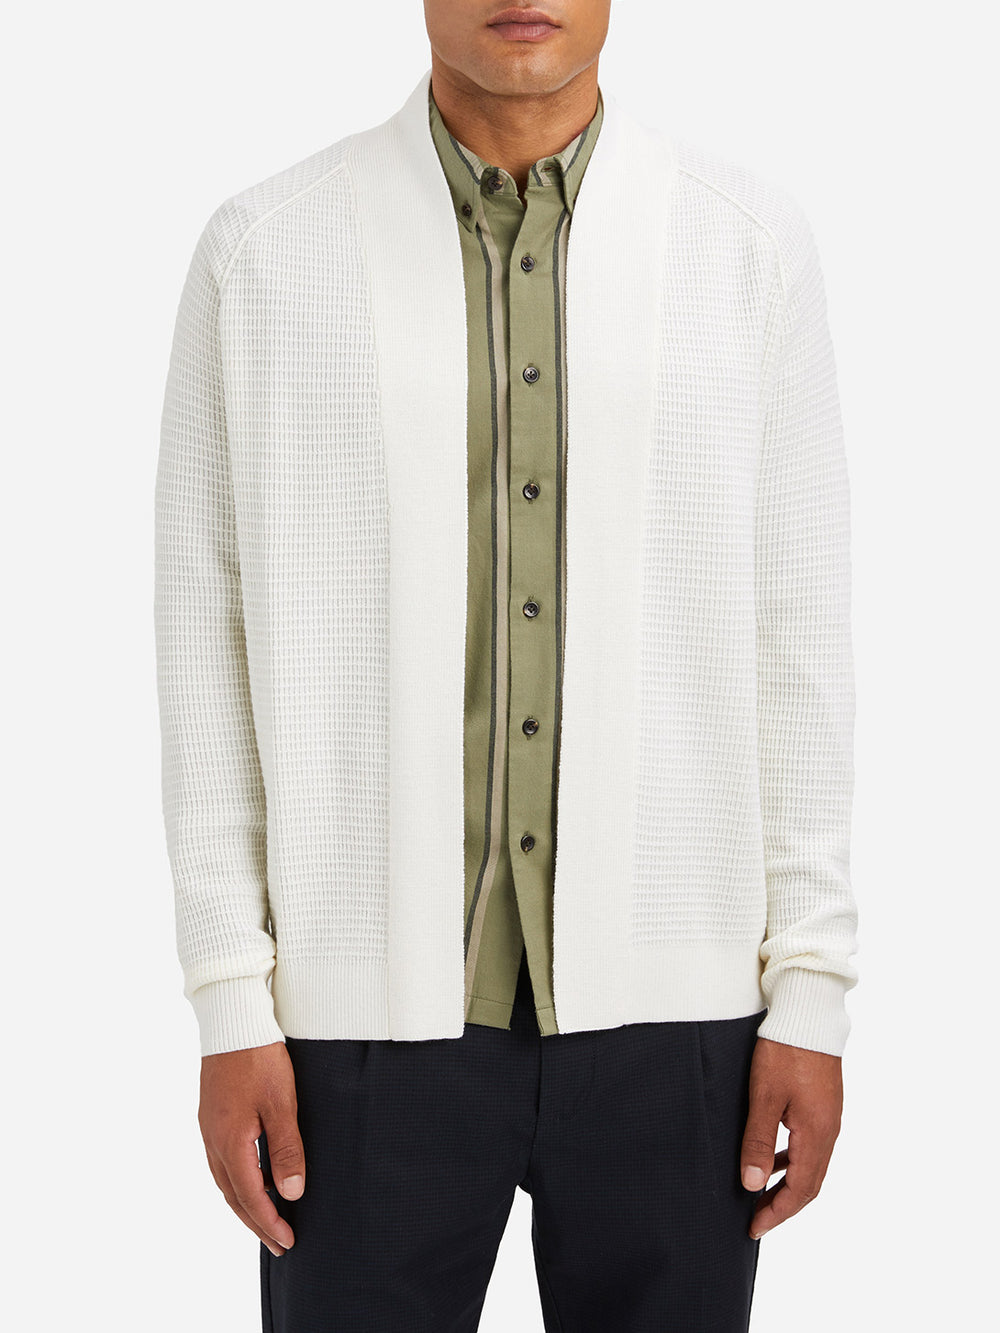 CREAM sweaters for men byron open cardigan ons clothing